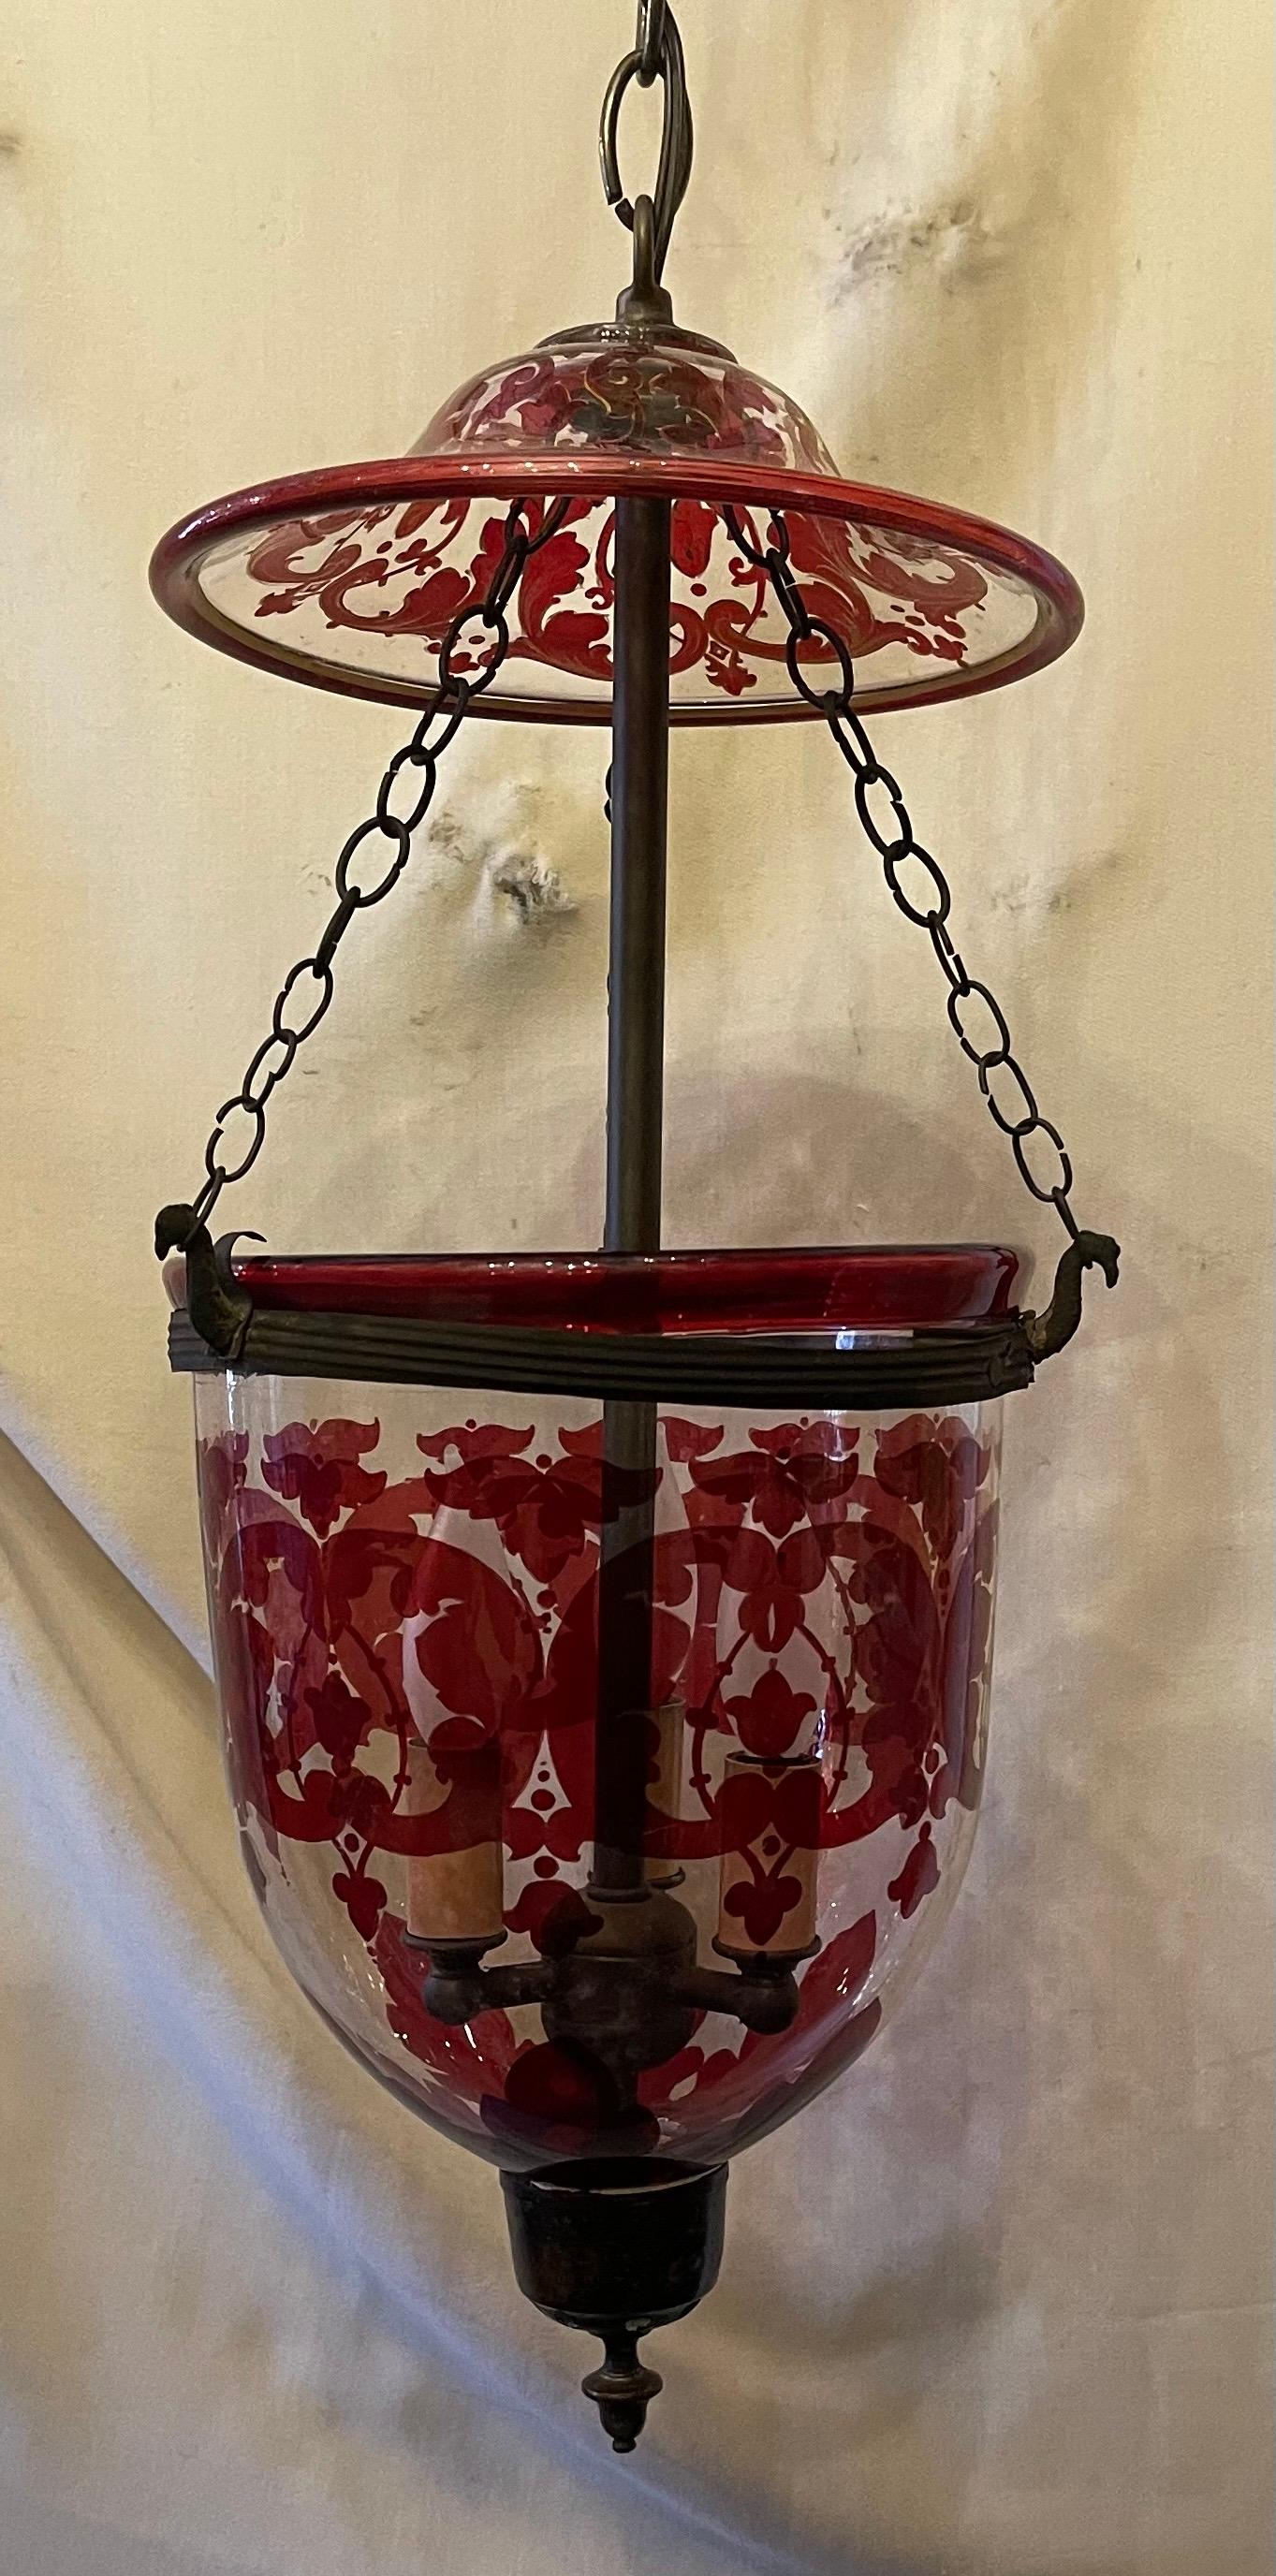 A Wonderful Cranberry Red & Clear Glass Bell Jar Lantern Light Fixture Pendent With 3 Candelabra Sockets On The Interior, Accompanied By Chain Canopy And Mounting Hardware 